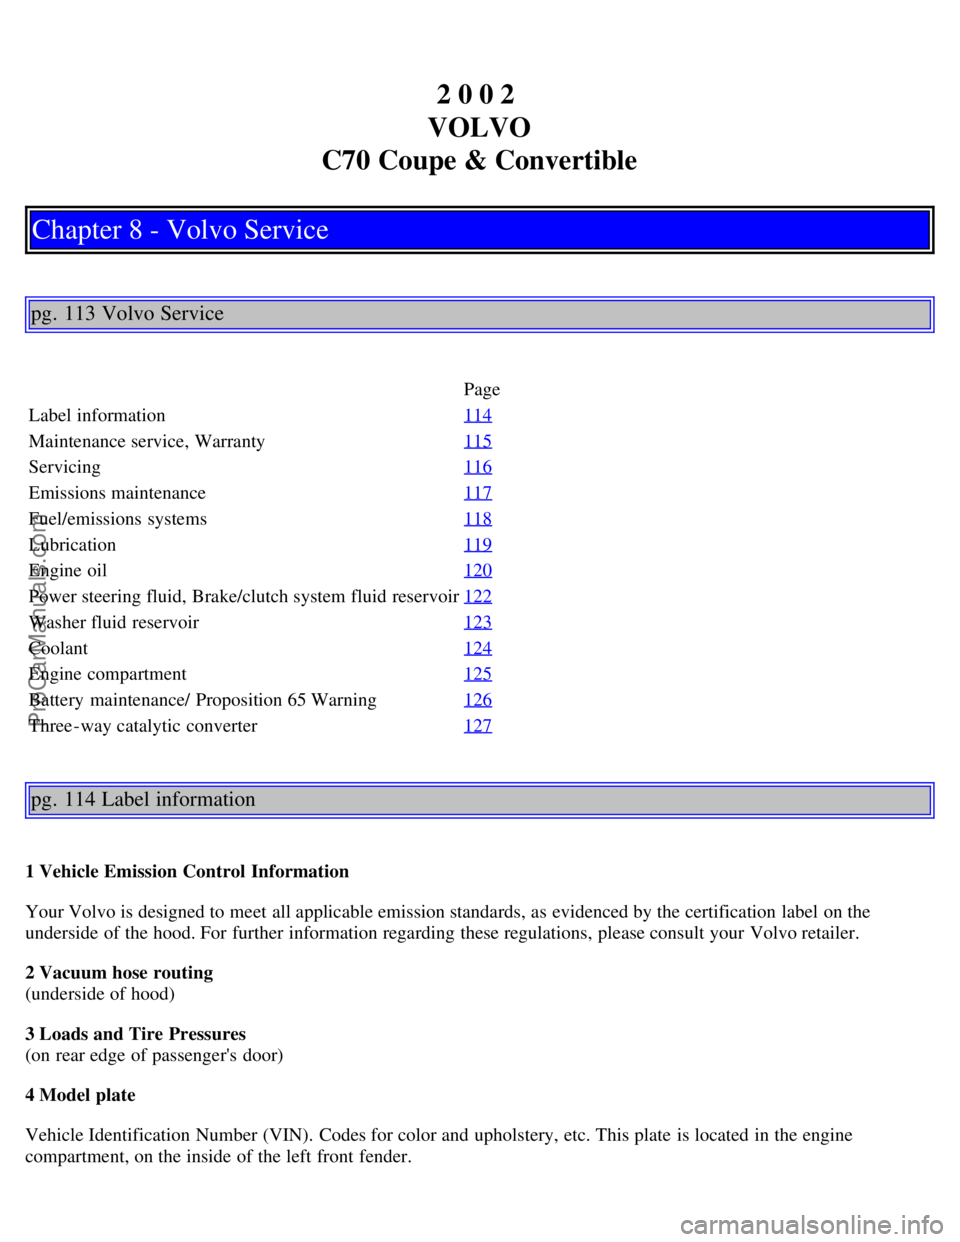 VOLVO C70 2002  Owners Manual 2 0 0 2 
VOLVO
C70 Coupe & Convertible
Chapter 8 - Volvo Service
pg. 113 Volvo Service
Page
Label information 114
Maintenance service, Warranty115
Servicing116
Emissions maintenance117
Fuel/emissions 